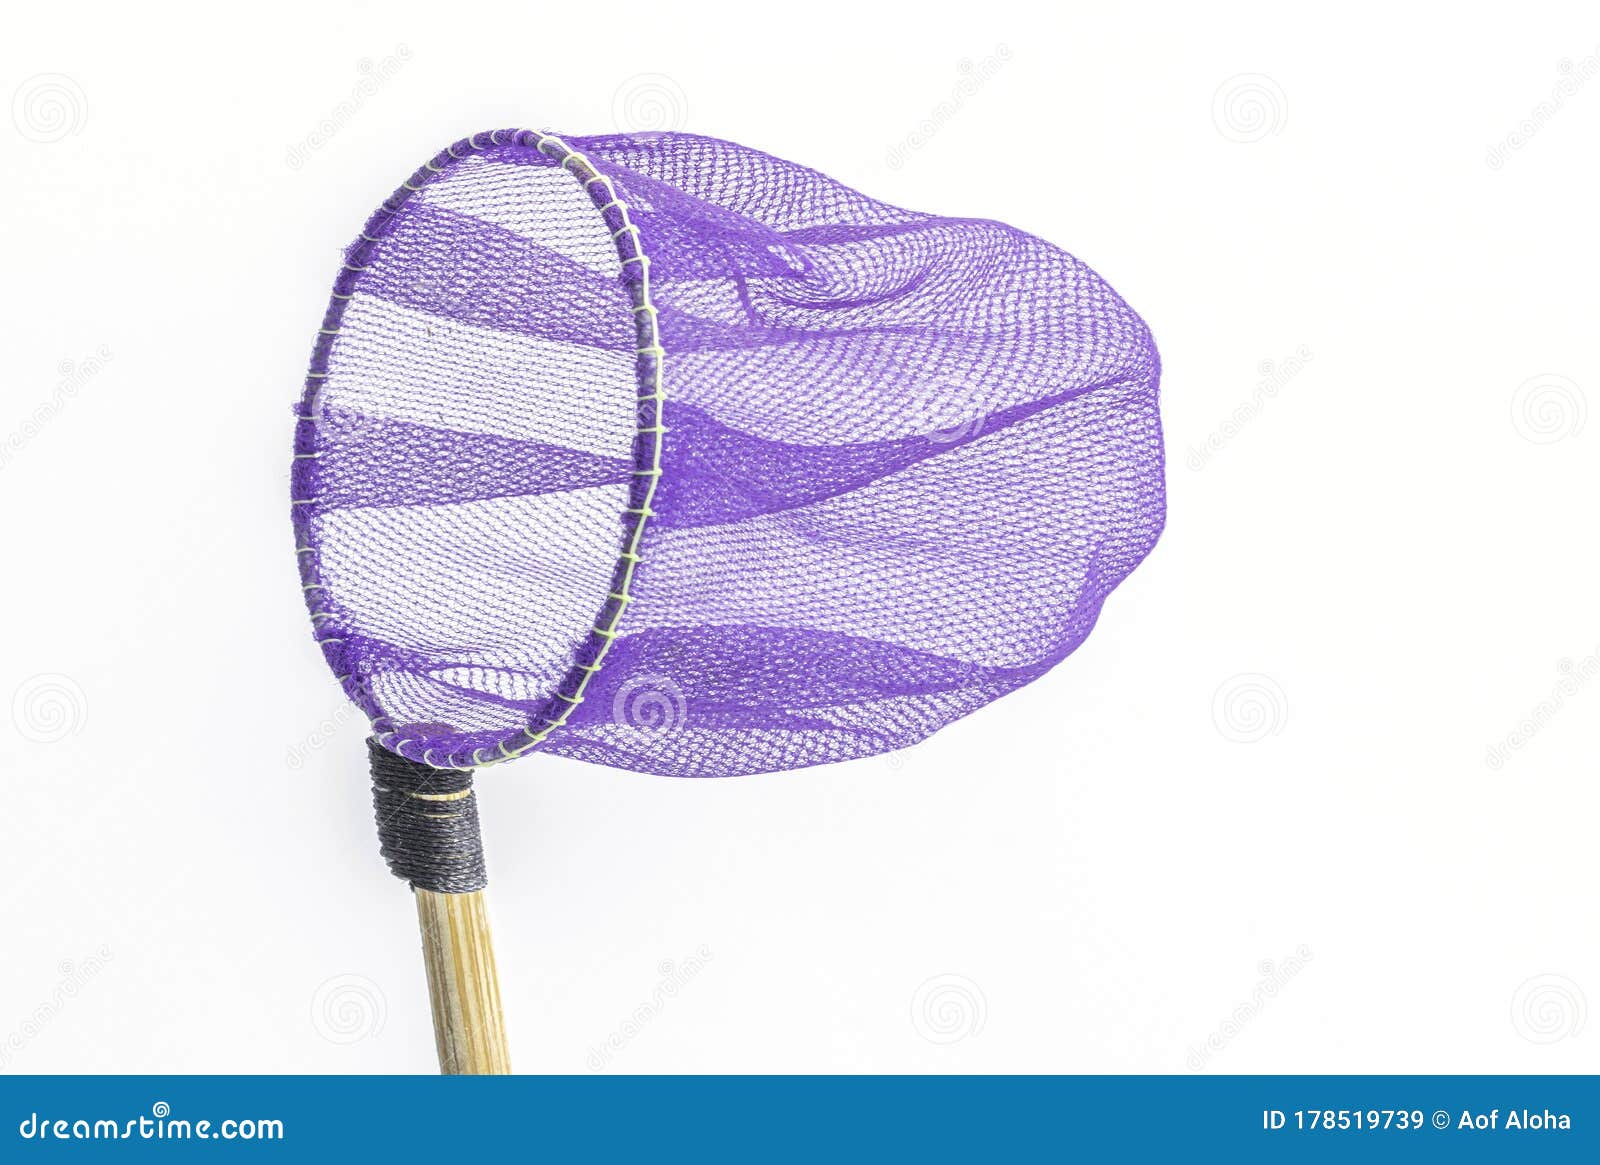 Purple Color Small Net for Fishing Isolate on White Background.Close Up  Aquarium Fish Net Scoop in Circle Shape. Stock Image - Image of small,  fishing: 178519739